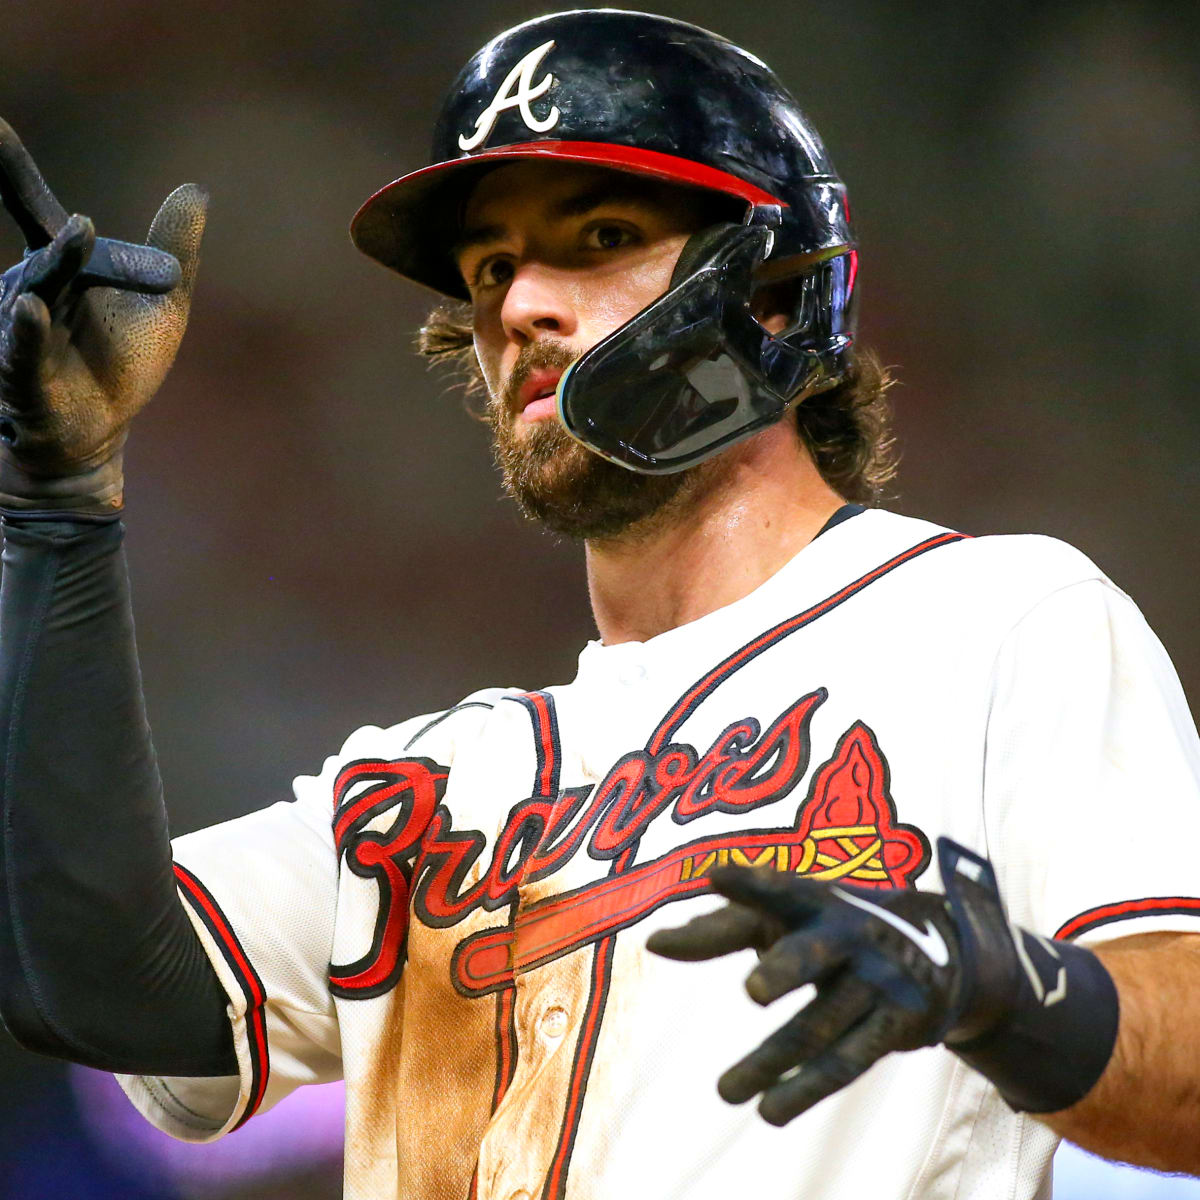 Dansby Swanson is Looking Like One of MLB's Best All-Around Shortstops